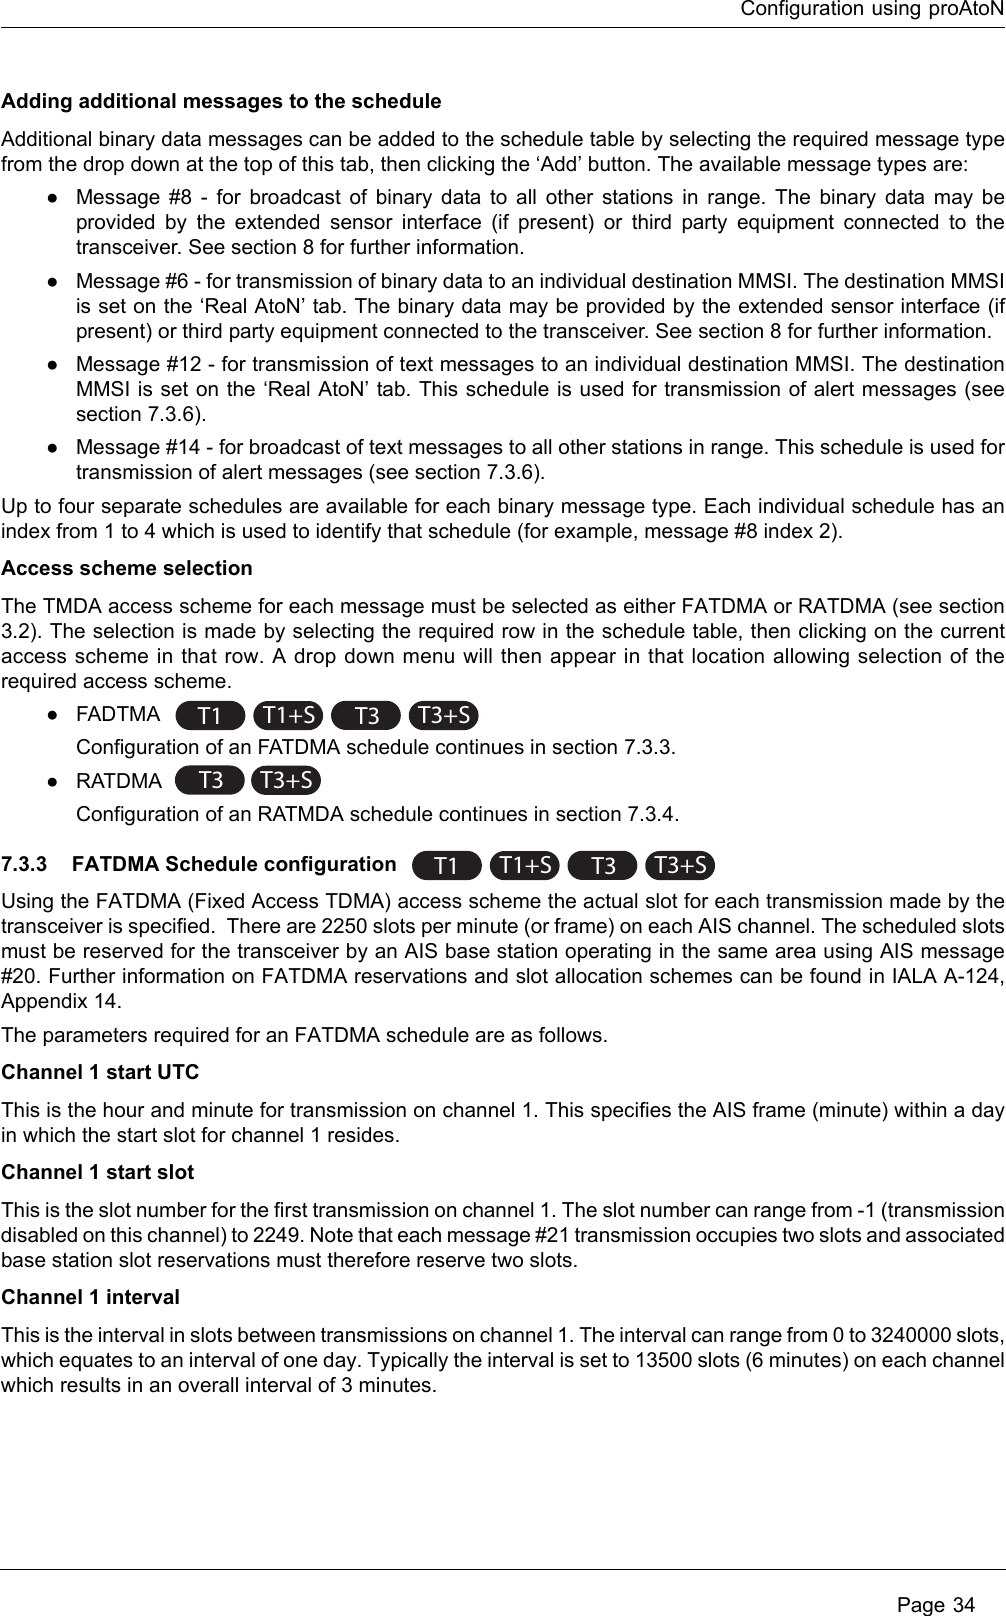 Configuration using proAtoN Page 34Adding additional messages to the scheduleAdditional binary data messages can be added to the schedule table by selecting the required message type from the drop down at the top of this tab, then clicking the ‘Add’ button. The available message types are:●Message #8 - for broadcast of binary data to all other stations in range. The binary data may be provided by the extended sensor interface (if present) or third party equipment connected to the transceiver. See section 8 for further information.●Message #6 - for transmission of binary data to an individual destination MMSI. The destination MMSI is set on the ‘Real AtoN’ tab. The binary data may be provided by the extended sensor interface (if present) or third party equipment connected to the transceiver. See section 8 for further information.●Message #12 - for transmission of text messages to an individual destination MMSI. The destination MMSI is set on the ‘Real AtoN’ tab. This schedule is used for transmission of alert messages (see section 7.3.6).●Message #14 - for broadcast of text messages to all other stations in range. This schedule is used for transmission of alert messages (see section 7.3.6).Up to four separate schedules are available for each binary message type. Each individual schedule has an index from 1 to 4 which is used to identify that schedule (for example, message #8 index 2). Access scheme selectionThe TMDA access scheme for each message must be selected as either FATDMA or RATDMA (see section 3.2). The selection is made by selecting the required row in the schedule table, then clicking on the current access scheme in that row. A drop down menu will then appear in that location allowing selection of the required access scheme. ●FADTMA Configuration of an FATDMA schedule continues in section 7.3.3.●RATDMA Configuration of an RATMDA schedule continues in section 7.3.4.7.3.3 FATDMA Schedule configuration Using the FATDMA (Fixed Access TDMA) access scheme the actual slot for each transmission made by the transceiver is specified.  There are 2250 slots per minute (or frame) on each AIS channel. The scheduled slots must be reserved for the transceiver by an AIS base station operating in the same area using AIS message #20. Further information on FATDMA reservations and slot allocation schemes can be found in IALA A-124, Appendix 14.The parameters required for an FATDMA schedule are as follows.Channel 1 start UTCThis is the hour and minute for transmission on channel 1. This specifies the AIS frame (minute) within a day in which the start slot for channel 1 resides. Channel 1 start slotThis is the slot number for the first transmission on channel 1. The slot number can range from -1 (transmission disabled on this channel) to 2249. Note that each message #21 transmission occupies two slots and associated base station slot reservations must therefore reserve two slots.Channel 1 intervalThis is the interval in slots between transmissions on channel 1. The interval can range from 0 to 3240000 slots, which equates to an interval of one day. Typically the interval is set to 13500 slots (6 minutes) on each channel which results in an overall interval of 3 minutes.T1 T1+ST3T3+ST3T3+ST1 T1+ST3T3+S